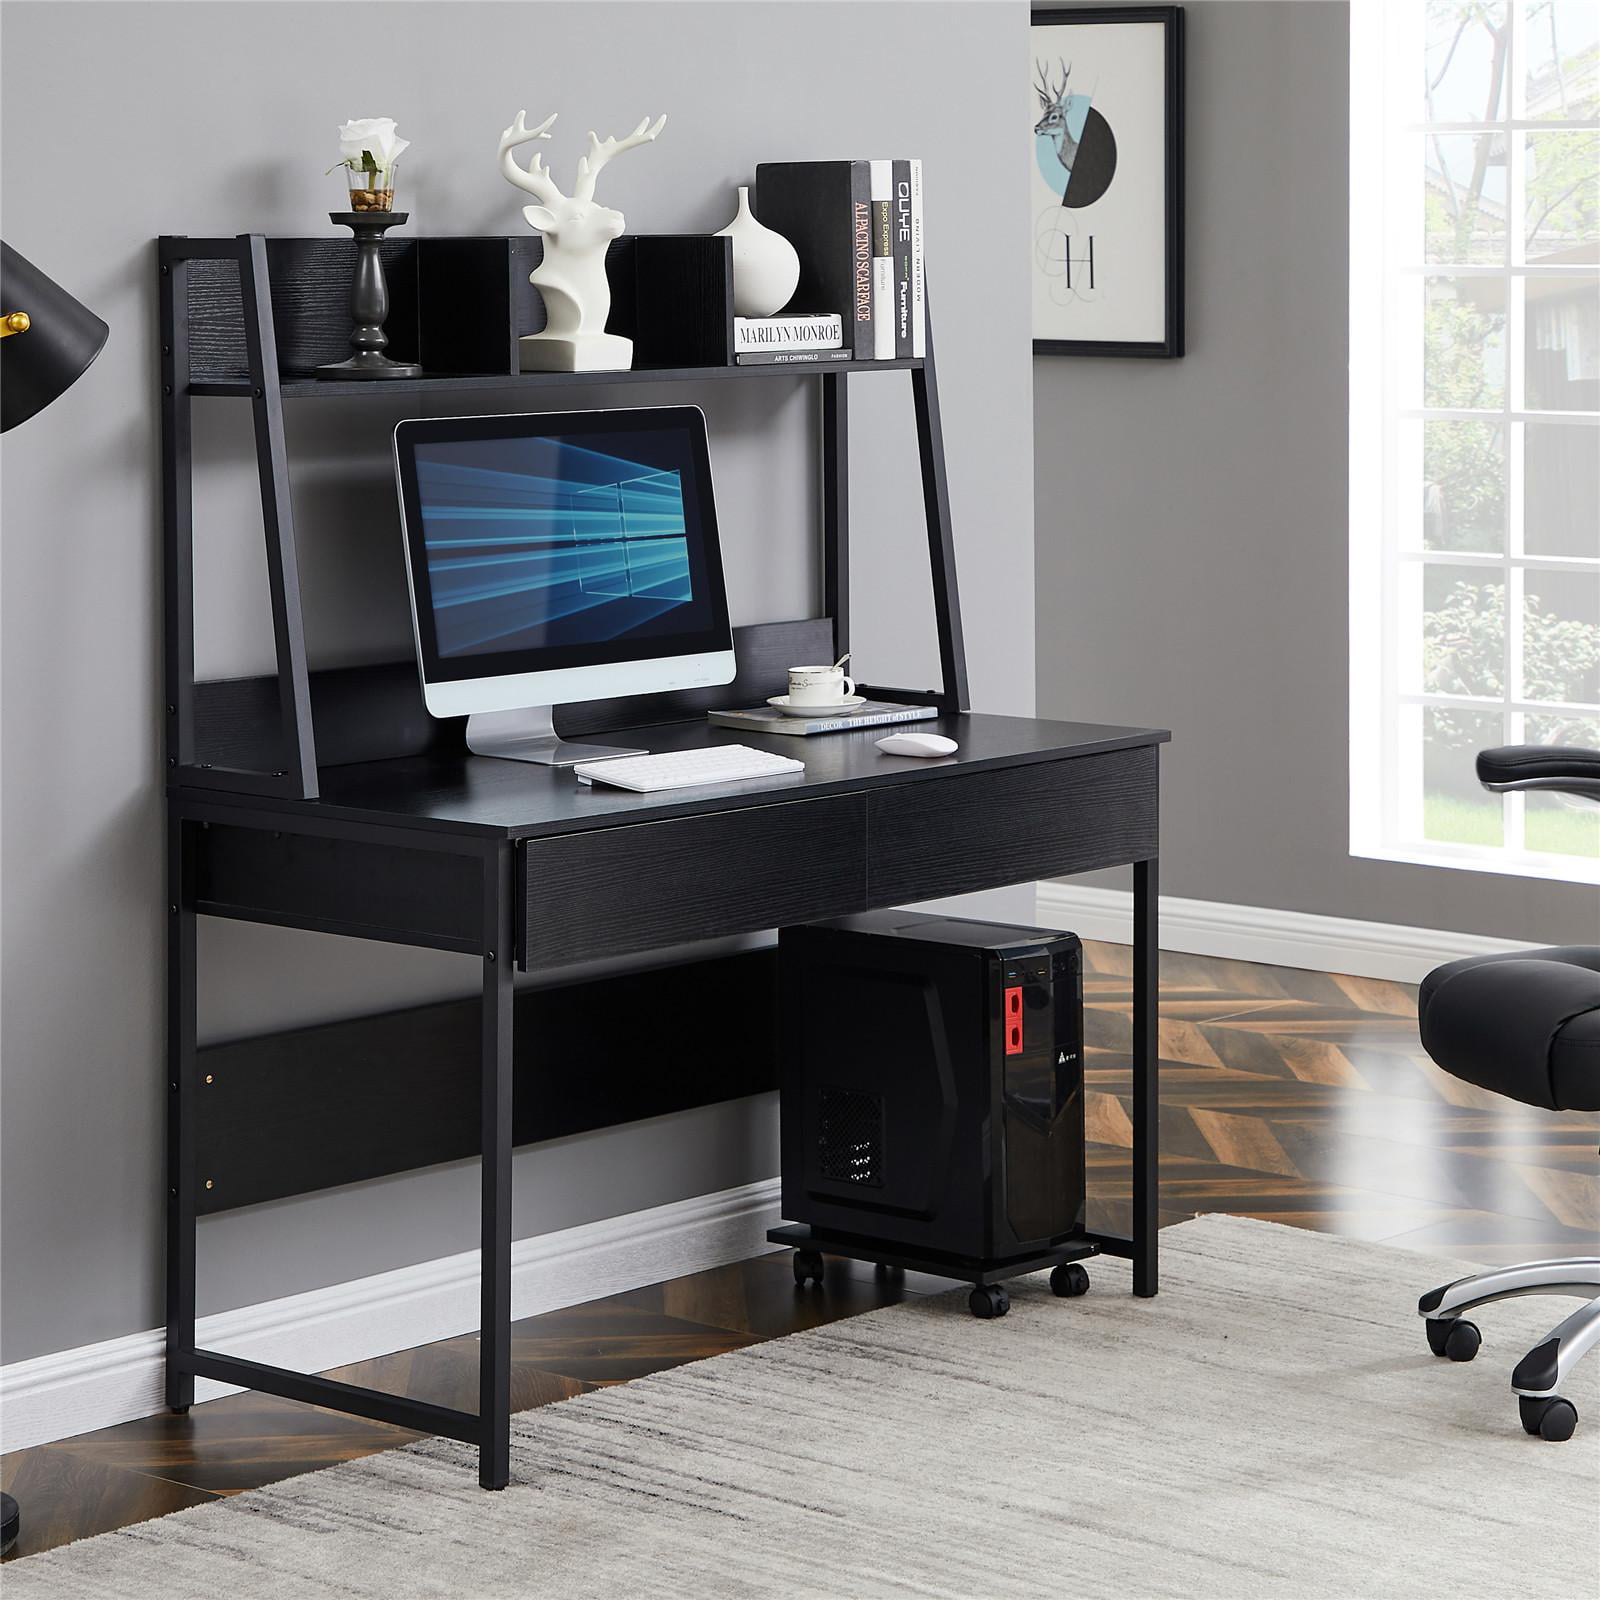 Home Office Computer Desk with Bookshelf, Desk with Space Saving Design,  Modern Simple Style Writing Desk Table (Black) 